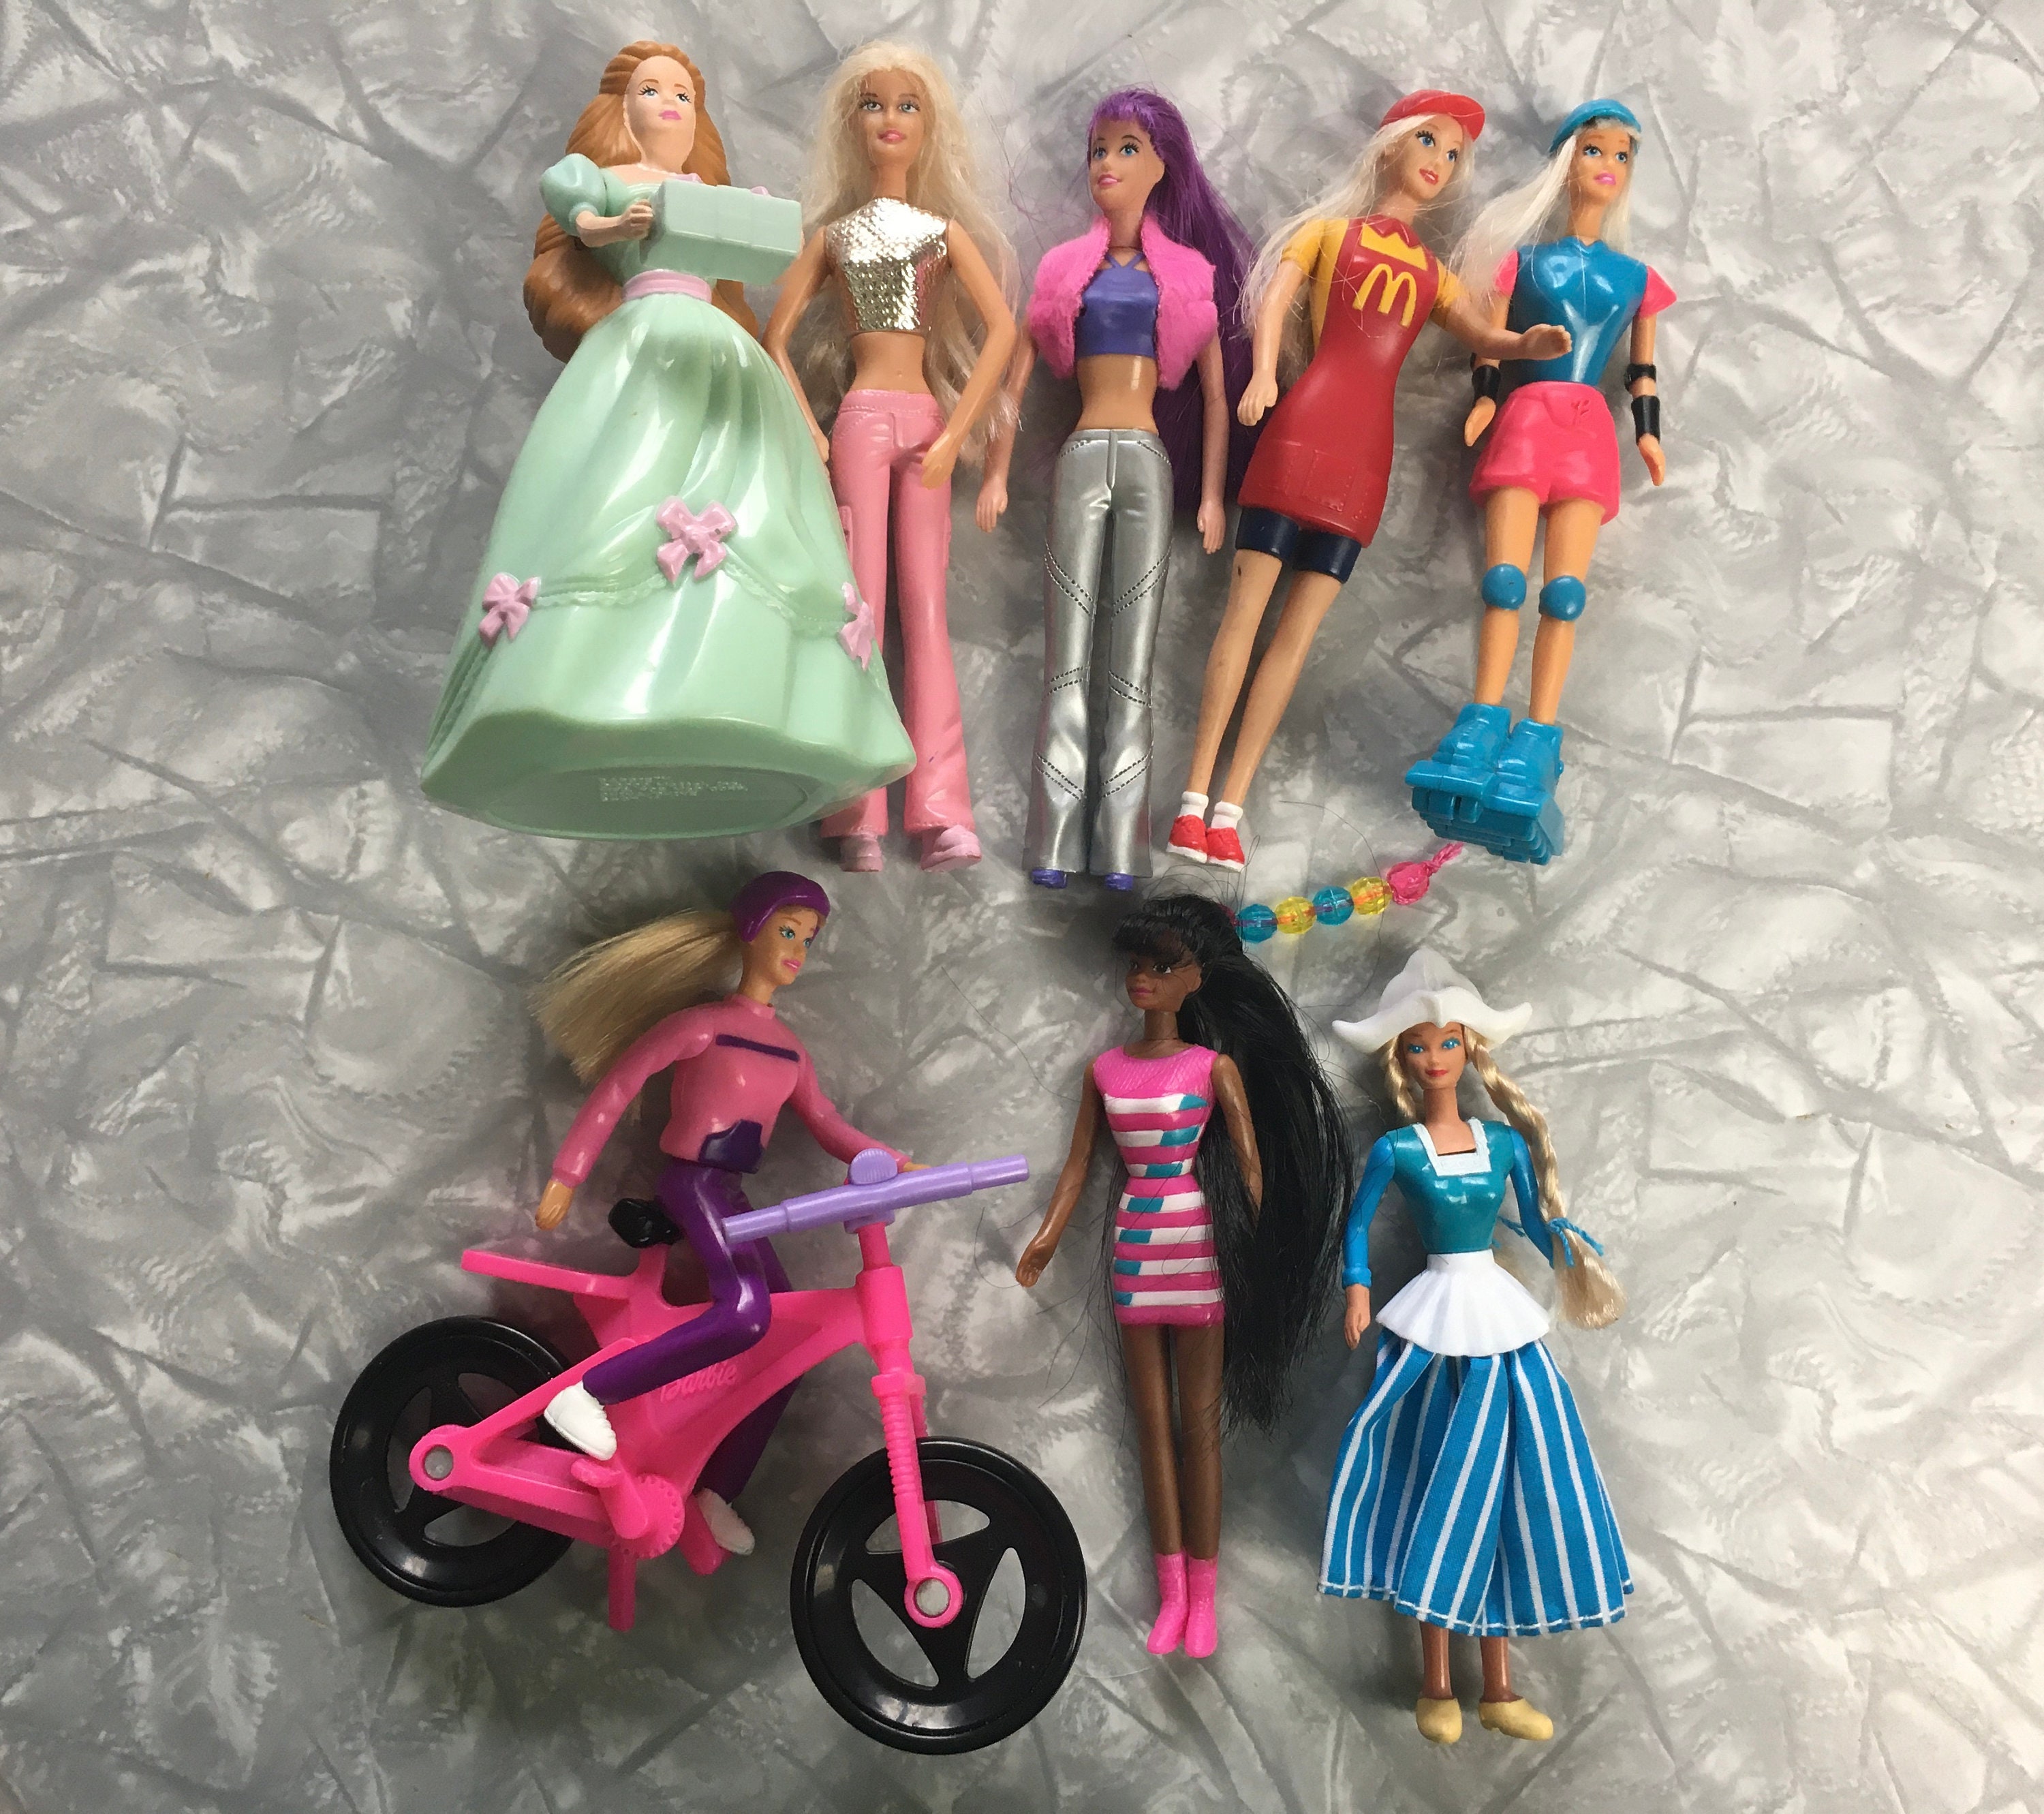 NEW 2002 McDonald's HAPPY MEAL TOYS BARBIE COMPLETE SET OF 6 FACTORY SEALED 